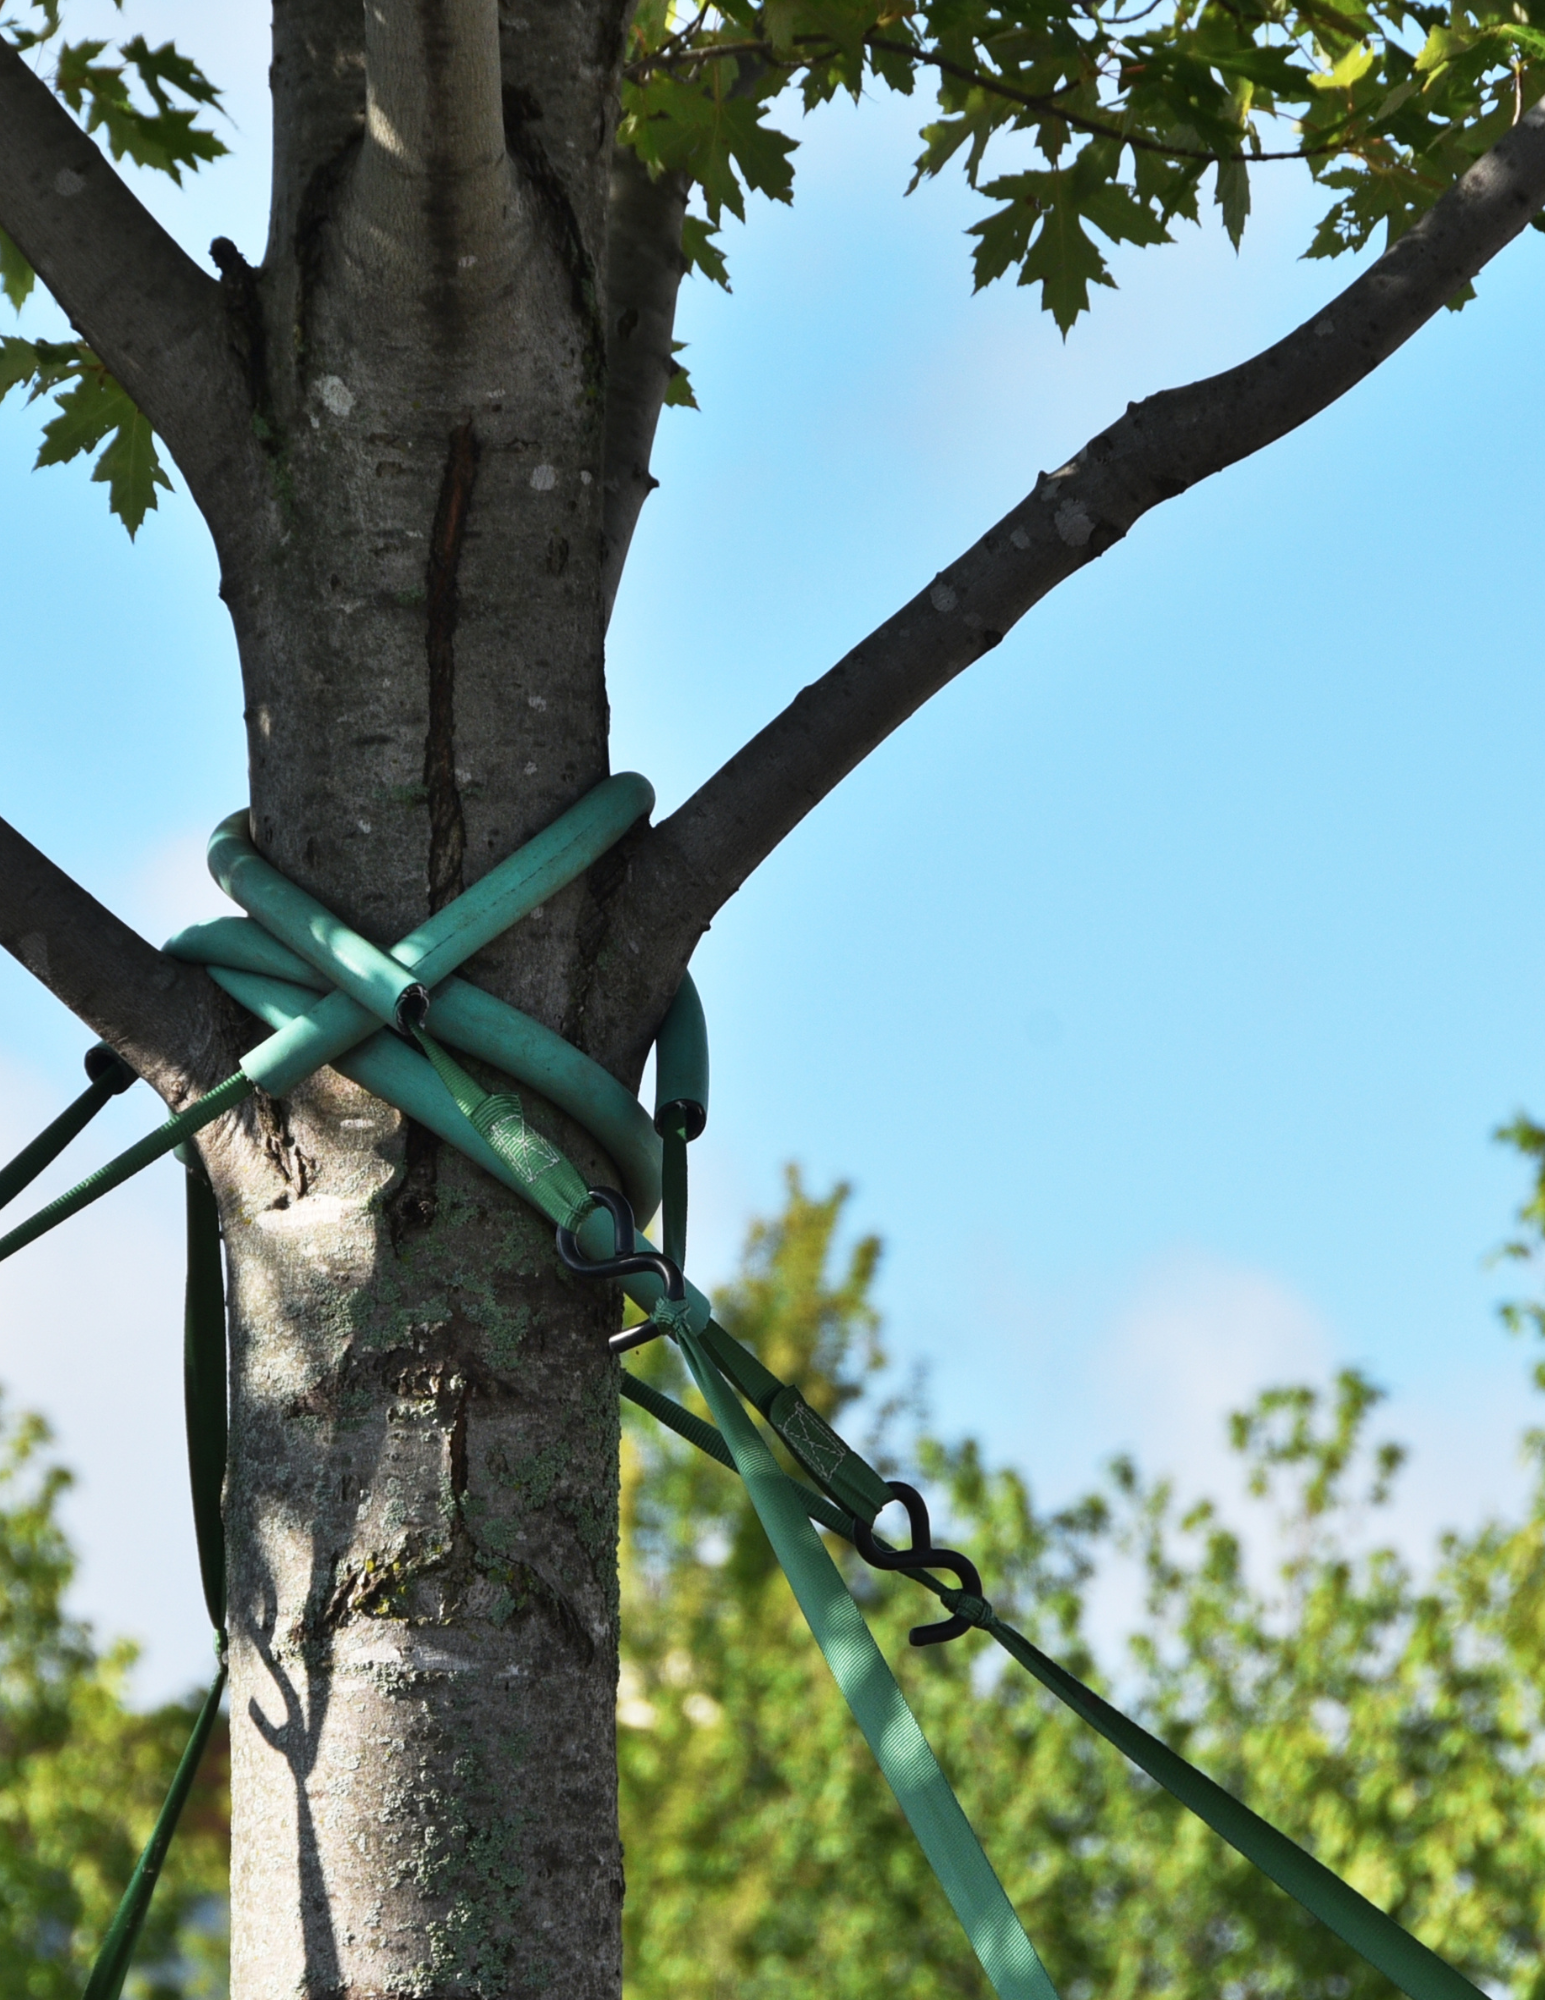 American Masters Tree Service Cabling & Bracing of trees